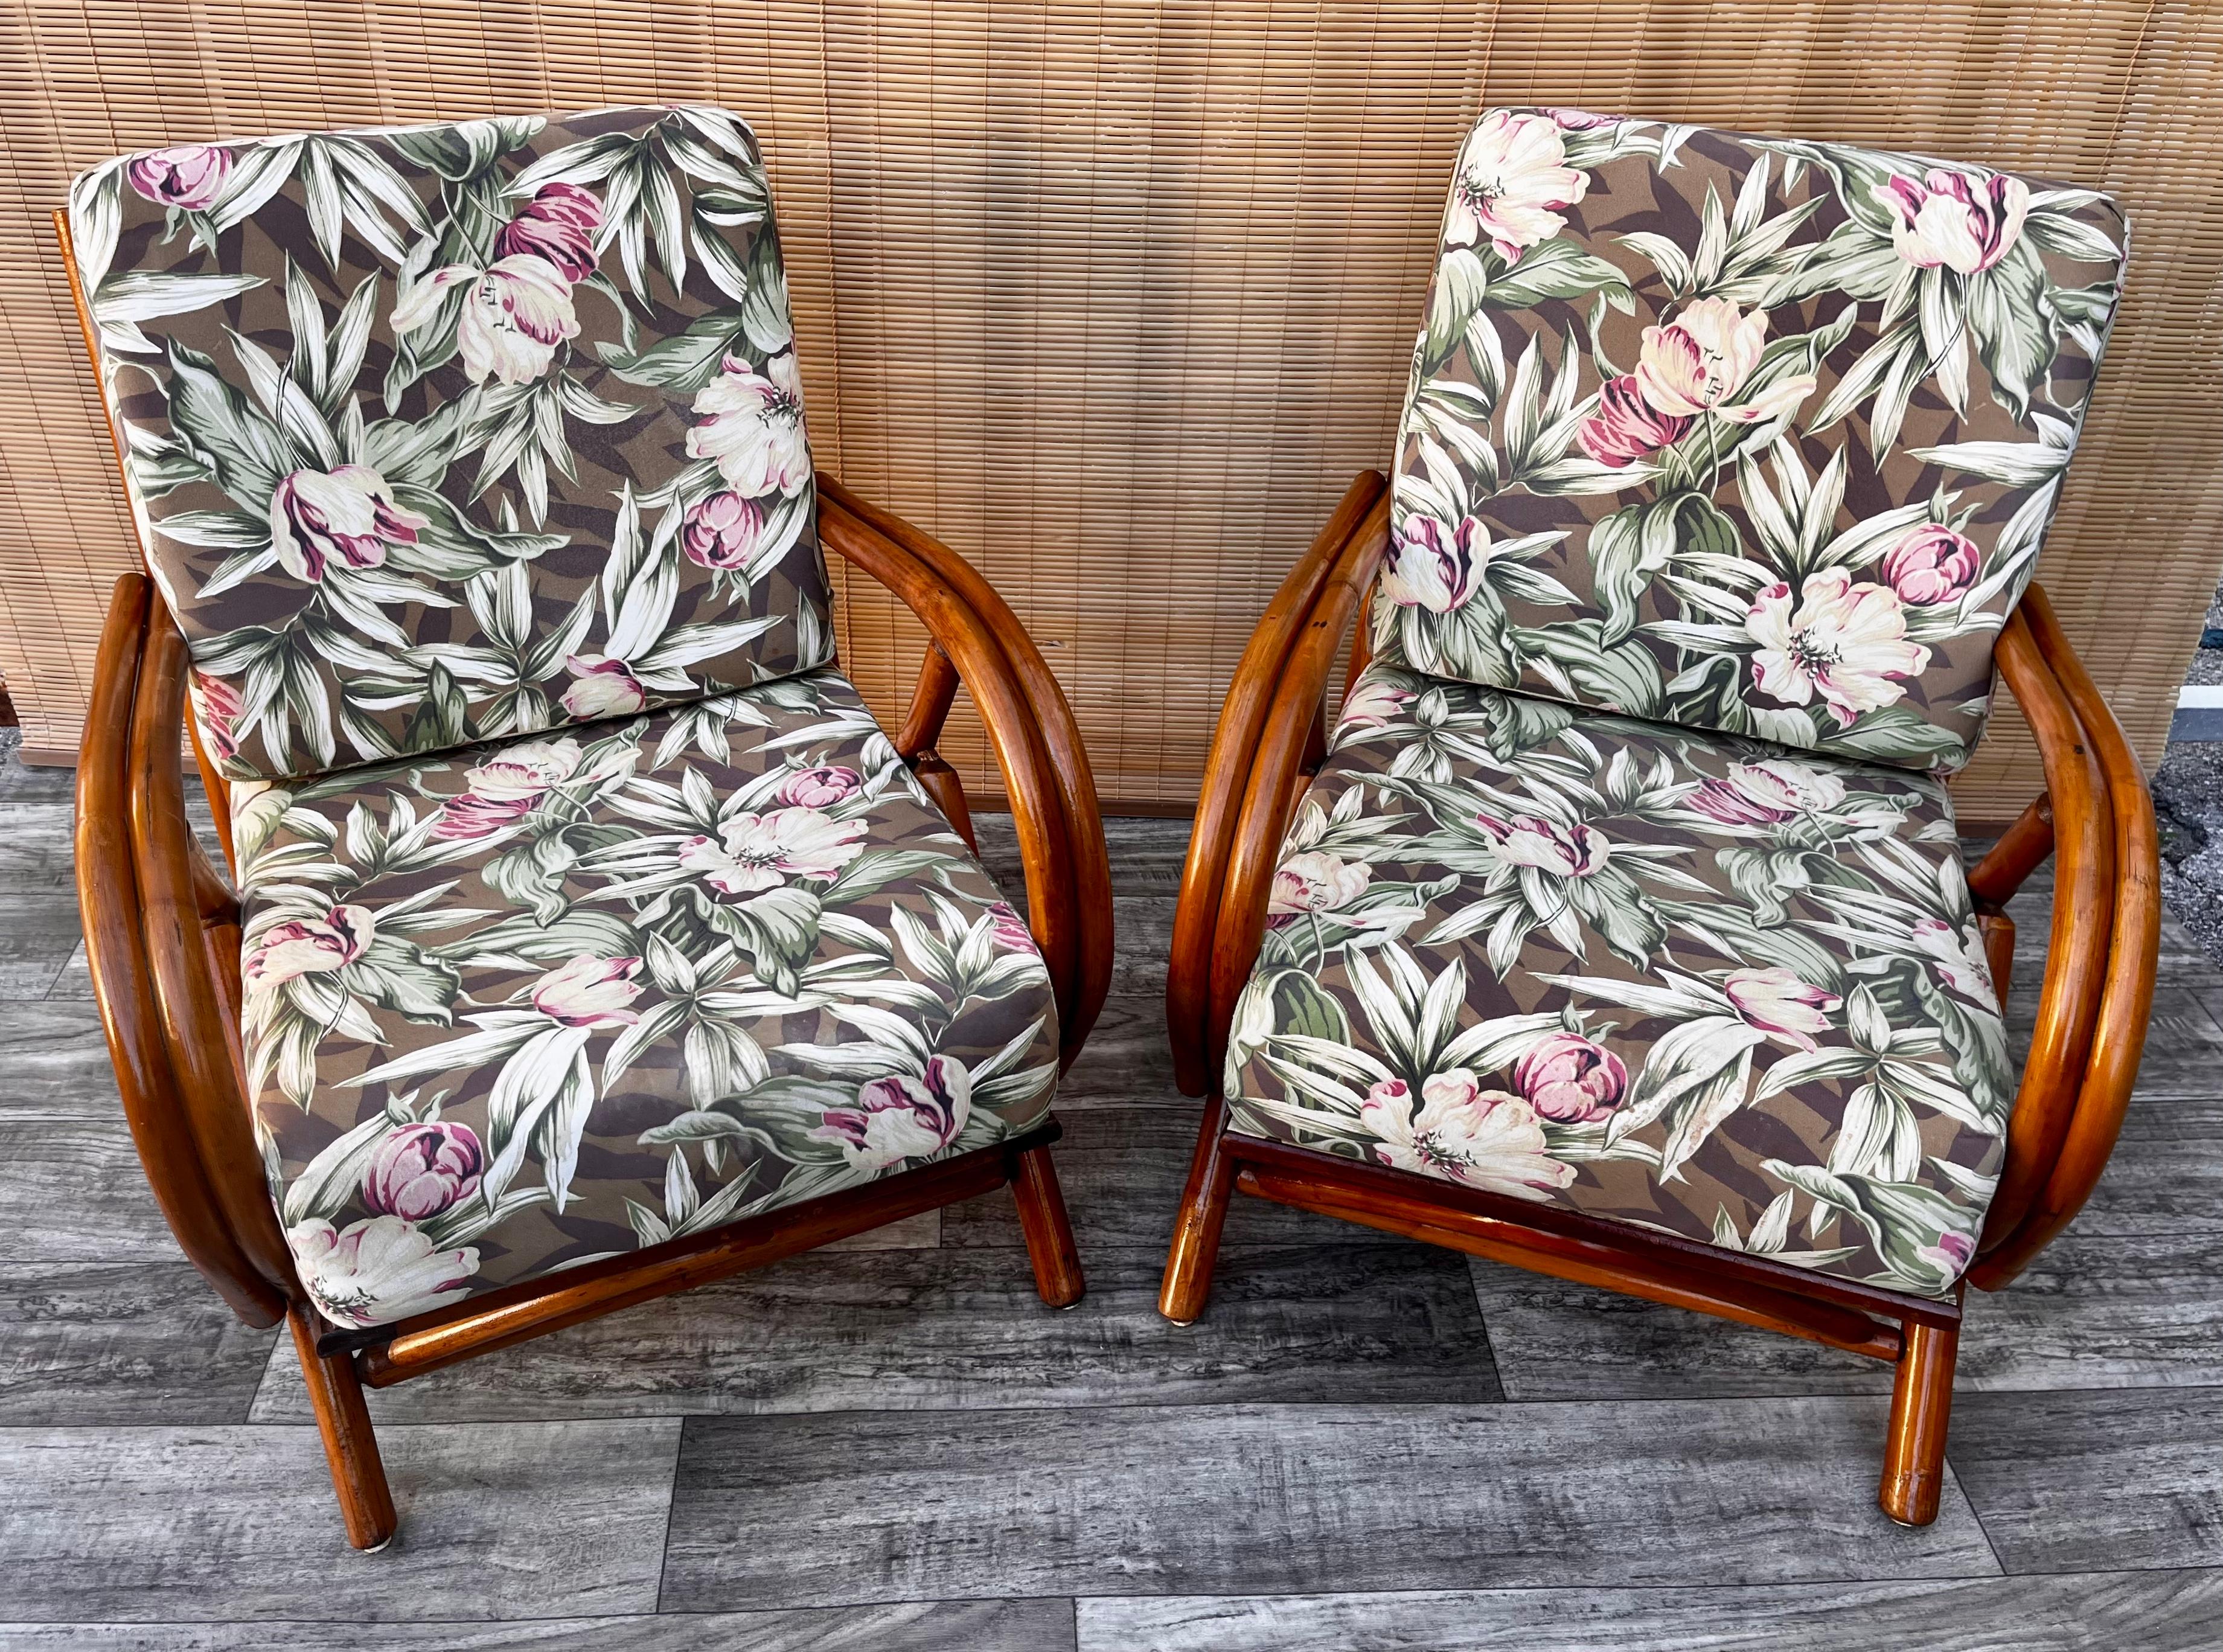 A pair of Vintage Mid-Century Modern Rattan lounge chairs, circa 1960s
Feature a rattan frame and bent rattan armrests with removable seating and backrest cushions, upholstered in floral motive fabric.
In good sound and cosmetic condition with